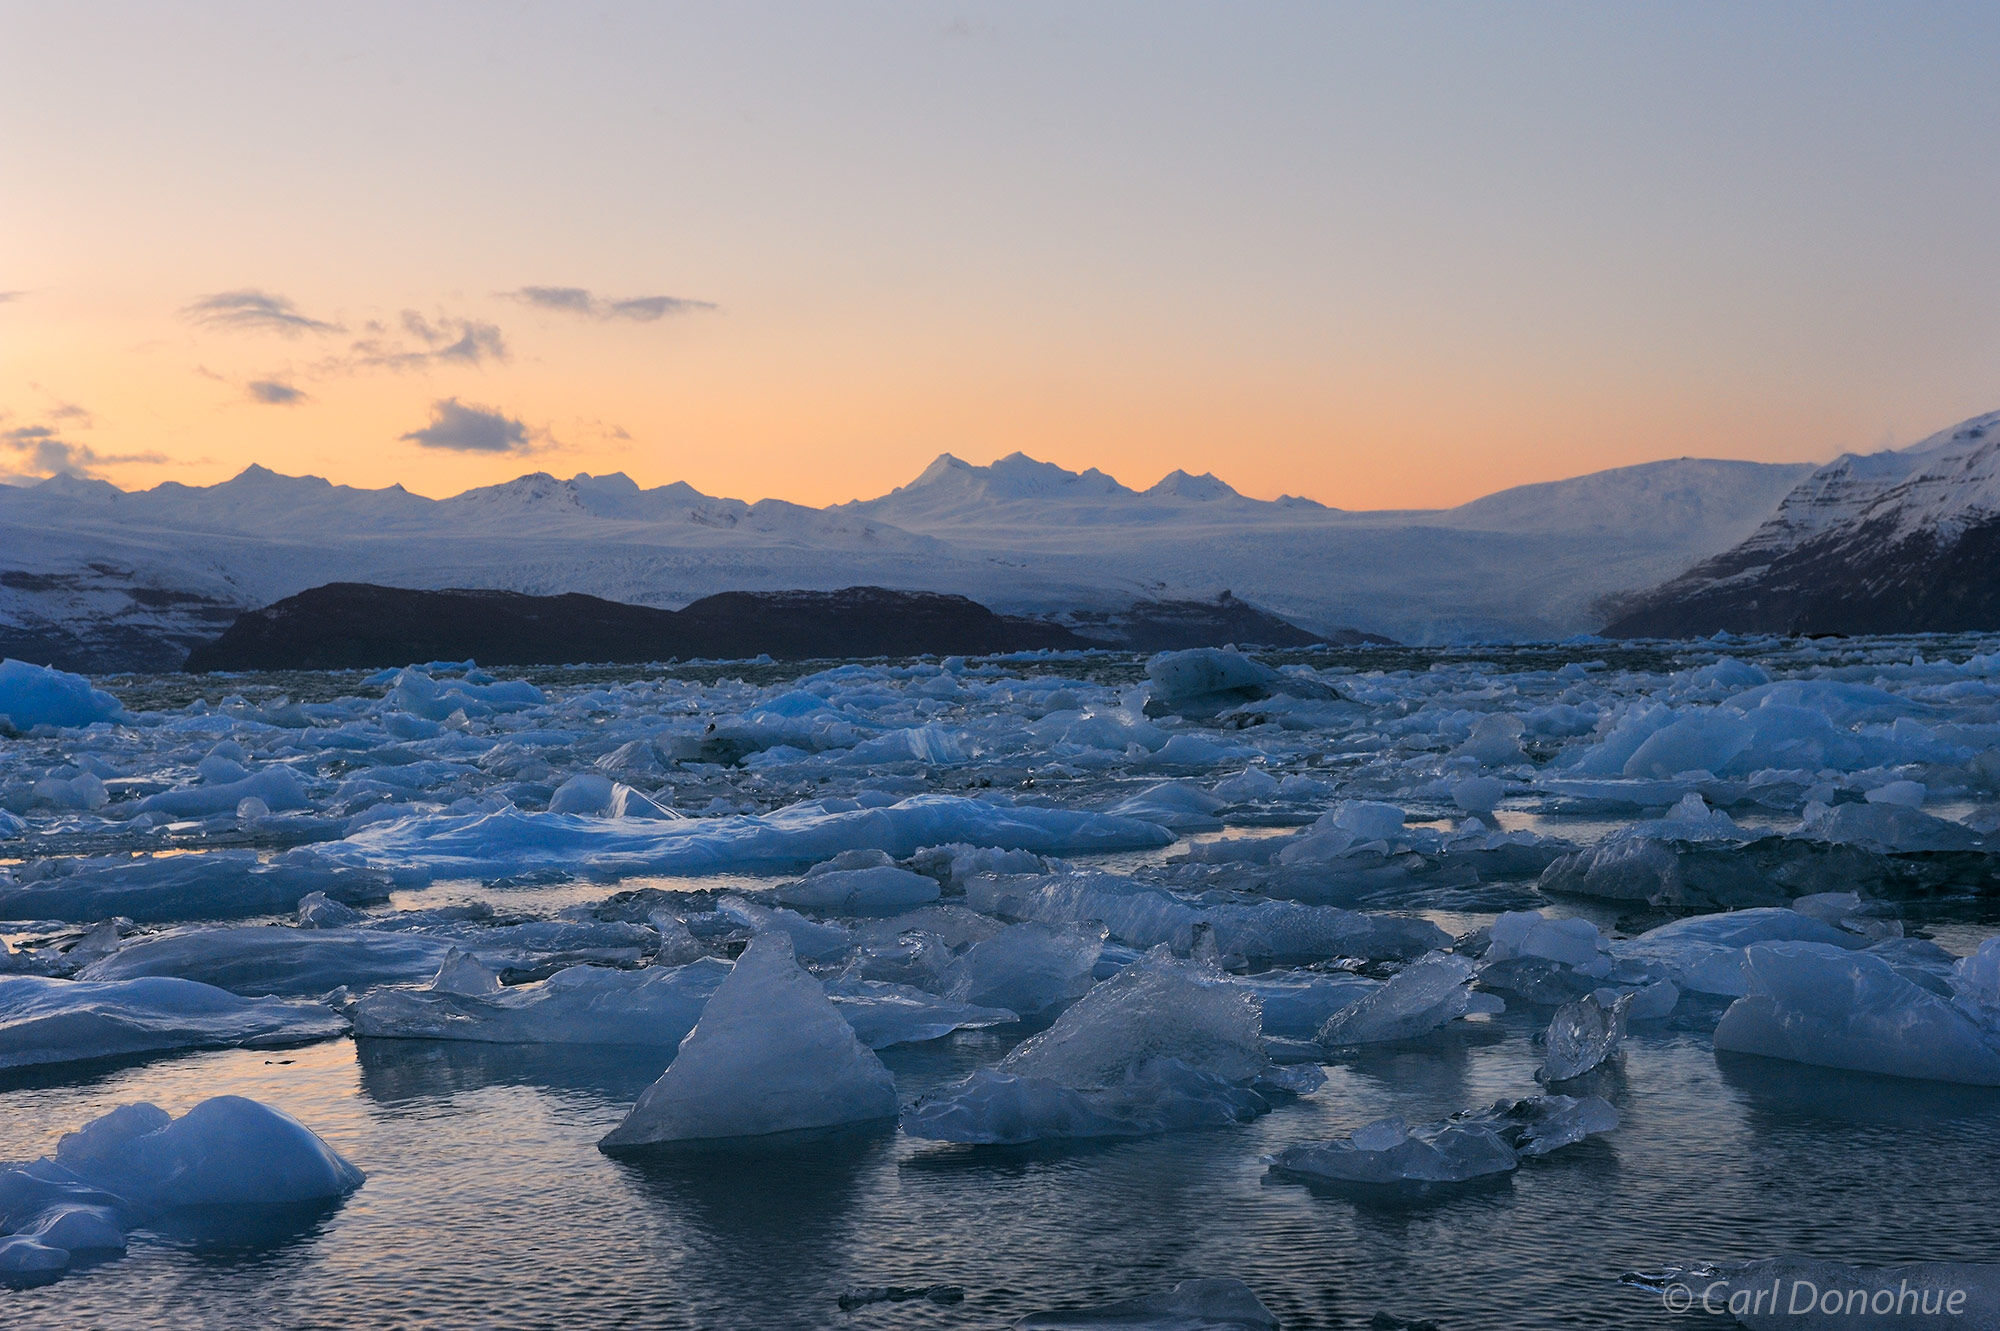 Icebergs on the shore at Icy Bay, the Guyot Hills in the background, and the last light of the day, after sunset. Icy Bay, Wrangell...